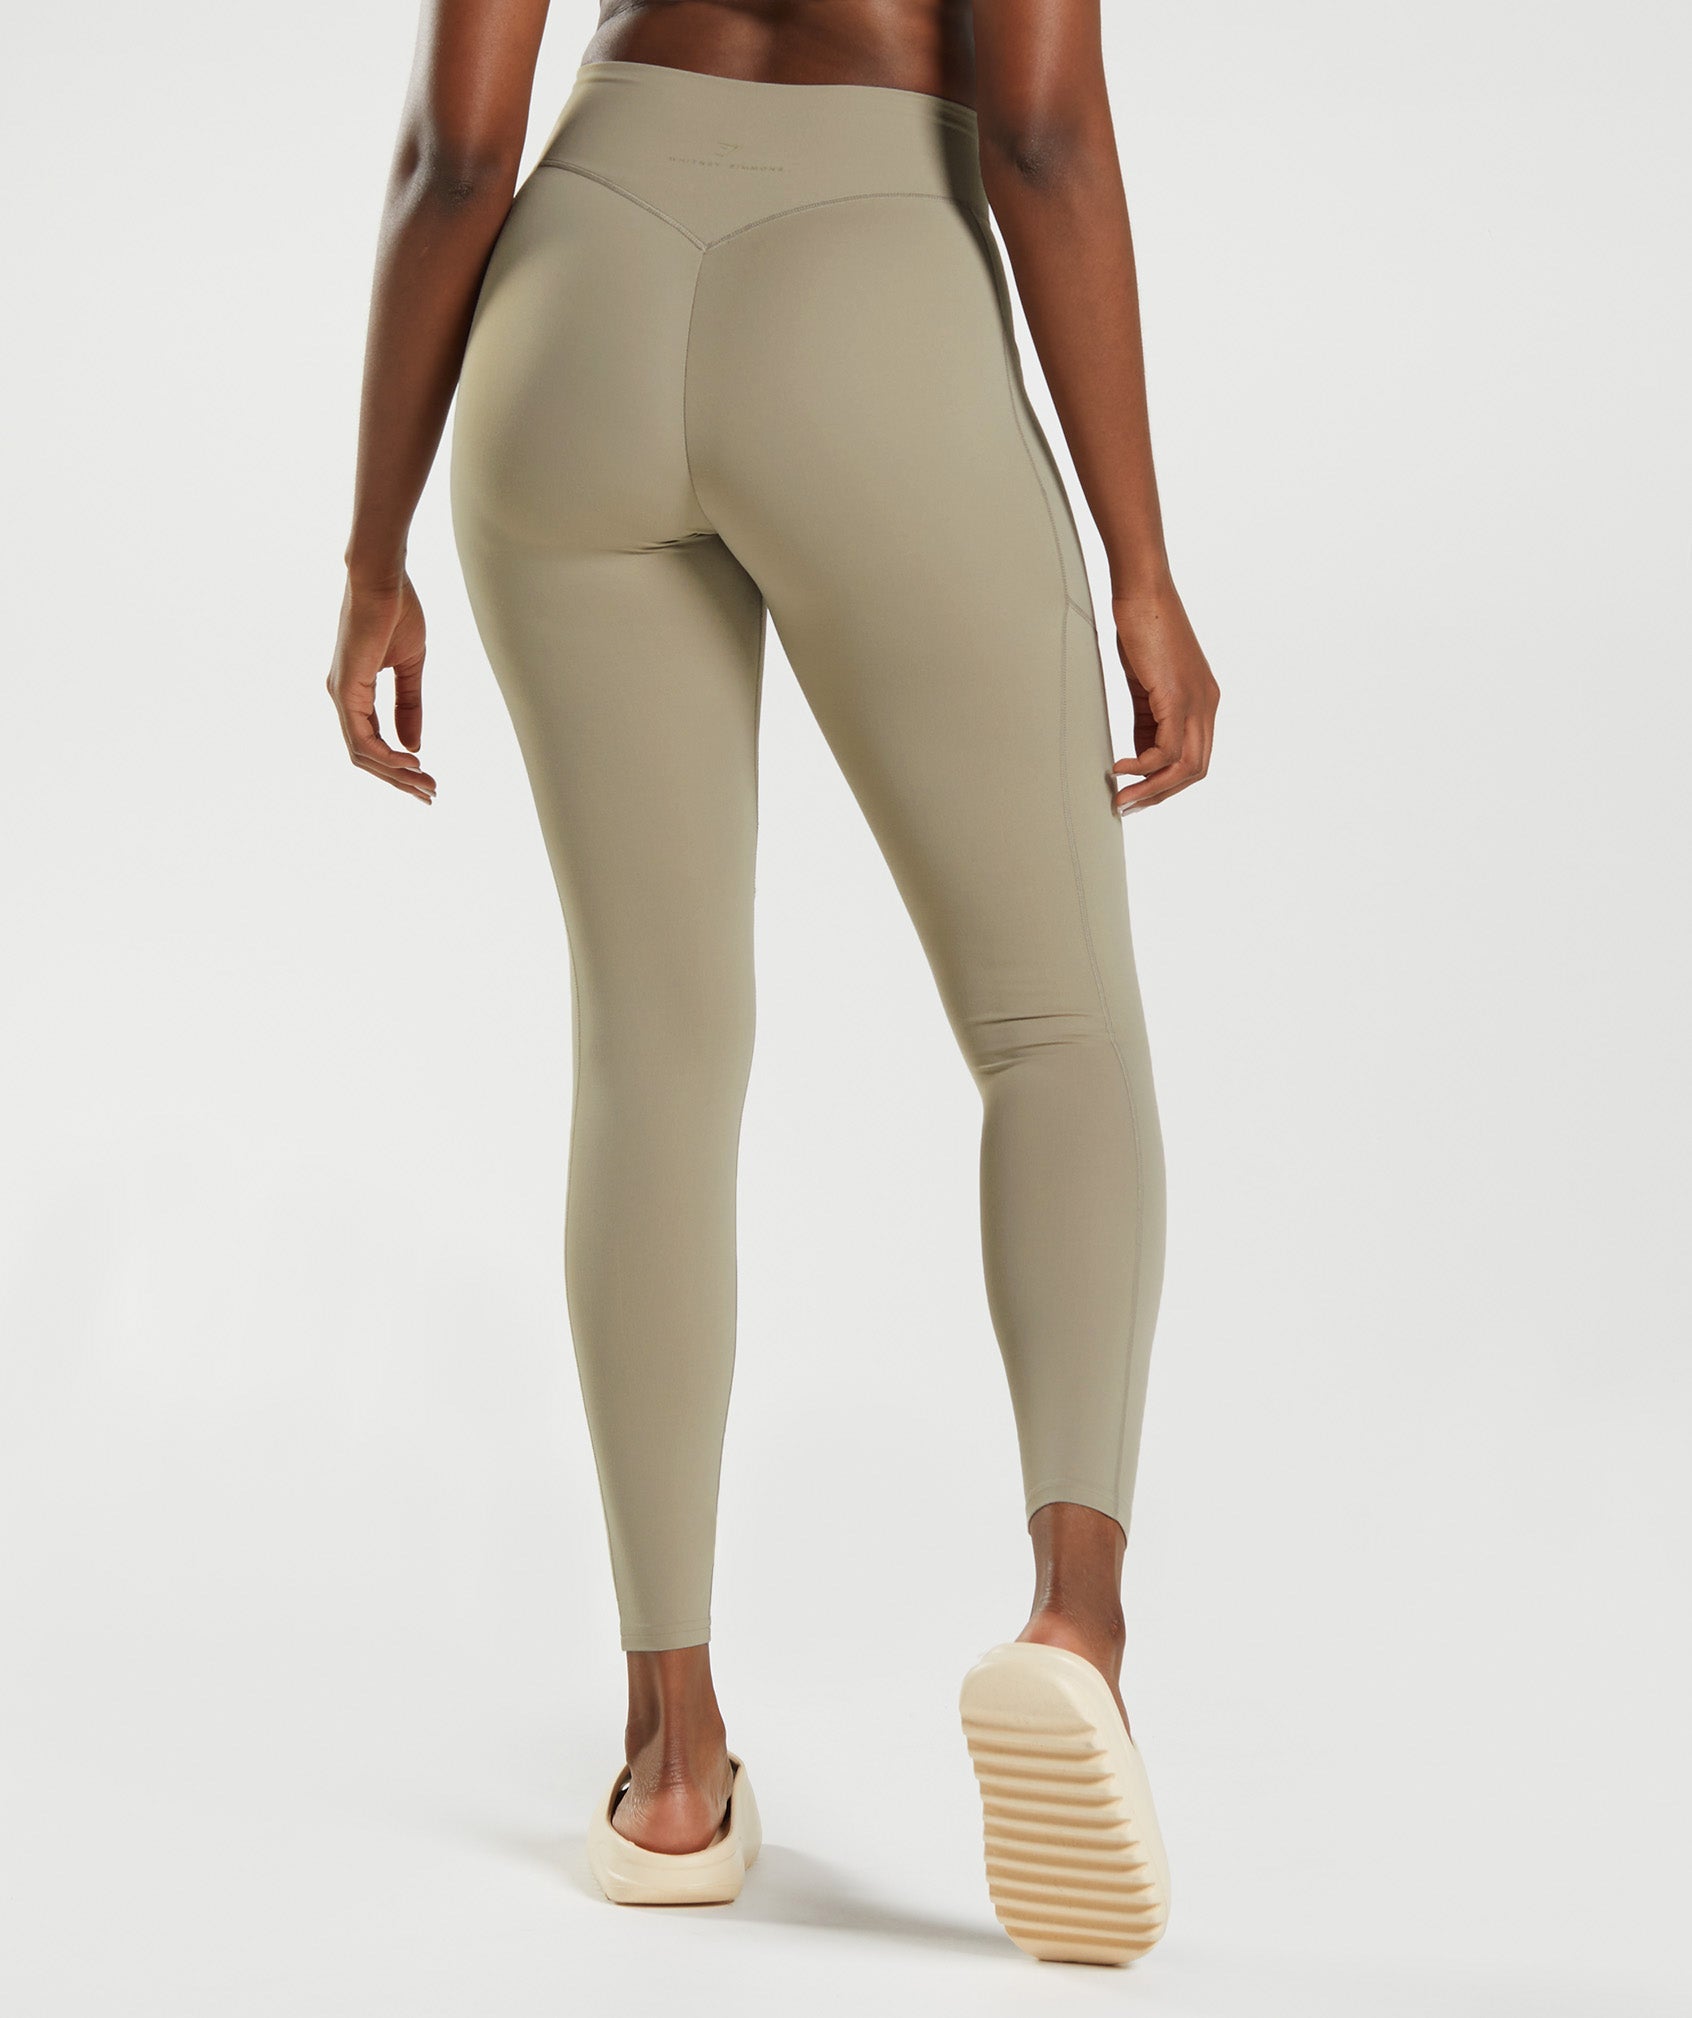 Whitney Everyday Pocket Leggings in Cement Brown - view 3